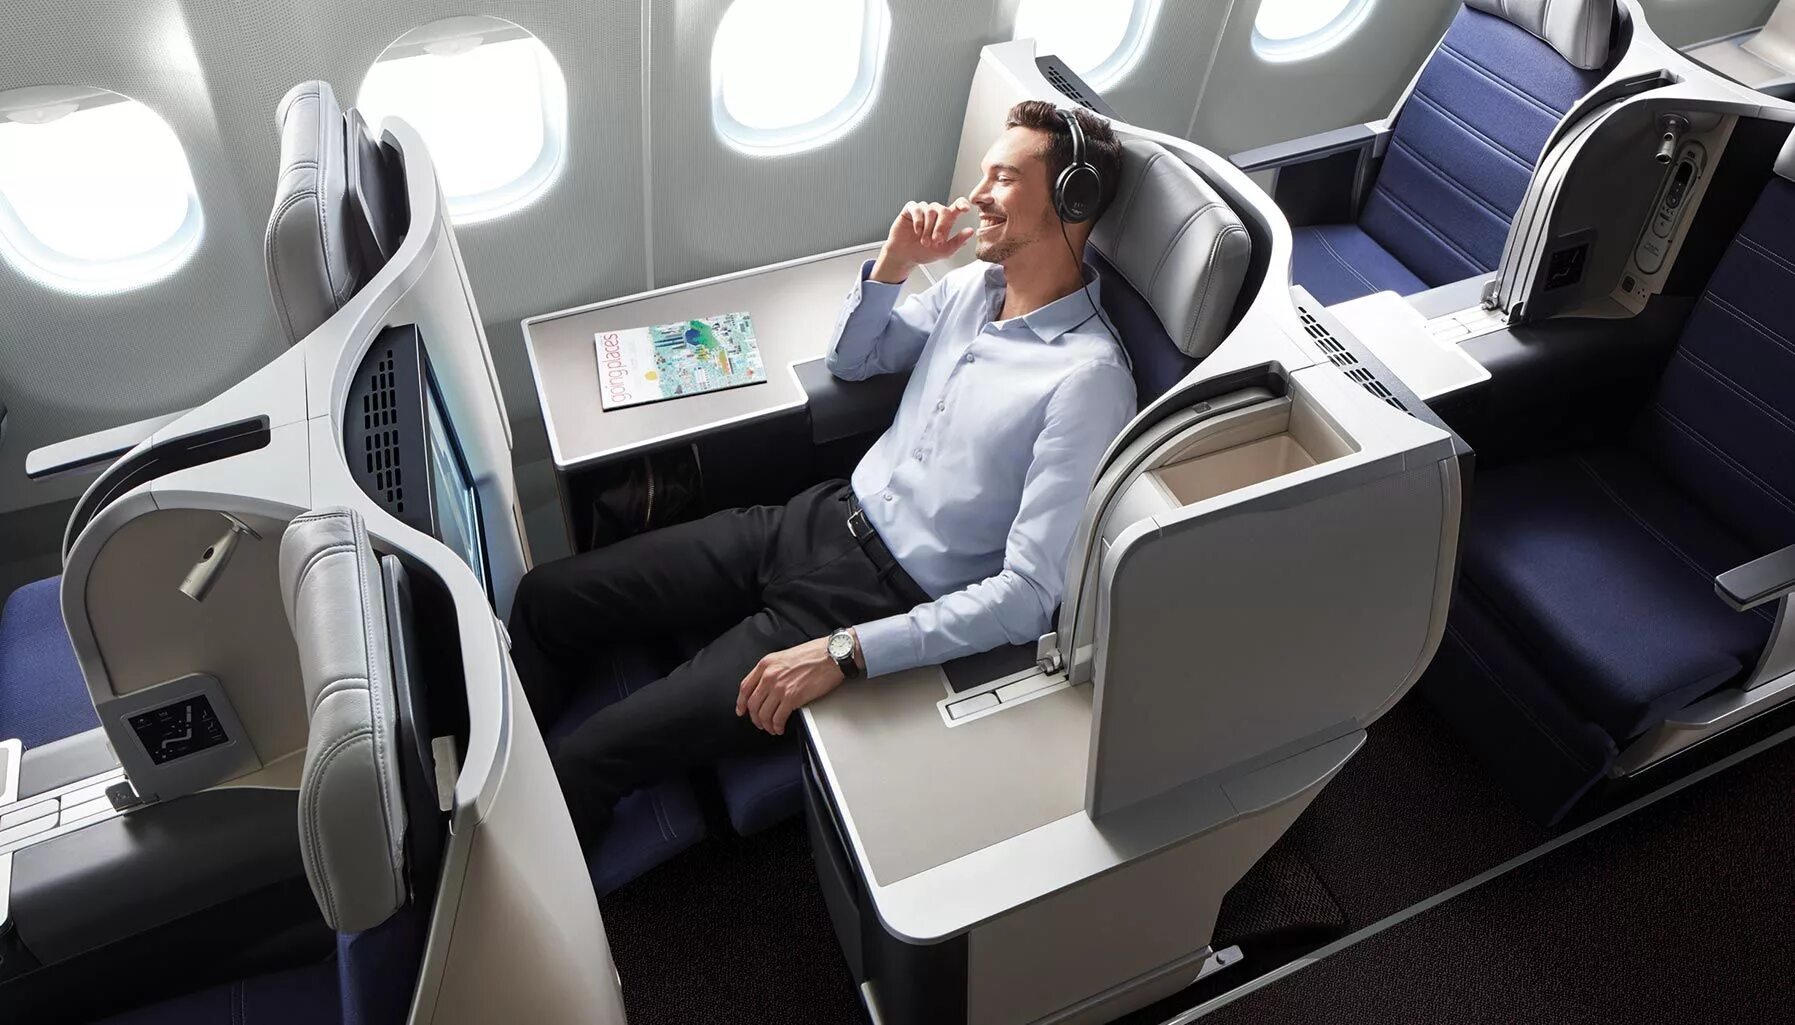 Airbus a350 бизнес класс. Malaysia Airlines Airbus a330 Business class. A350 first class. British Airways Business class Airbus.